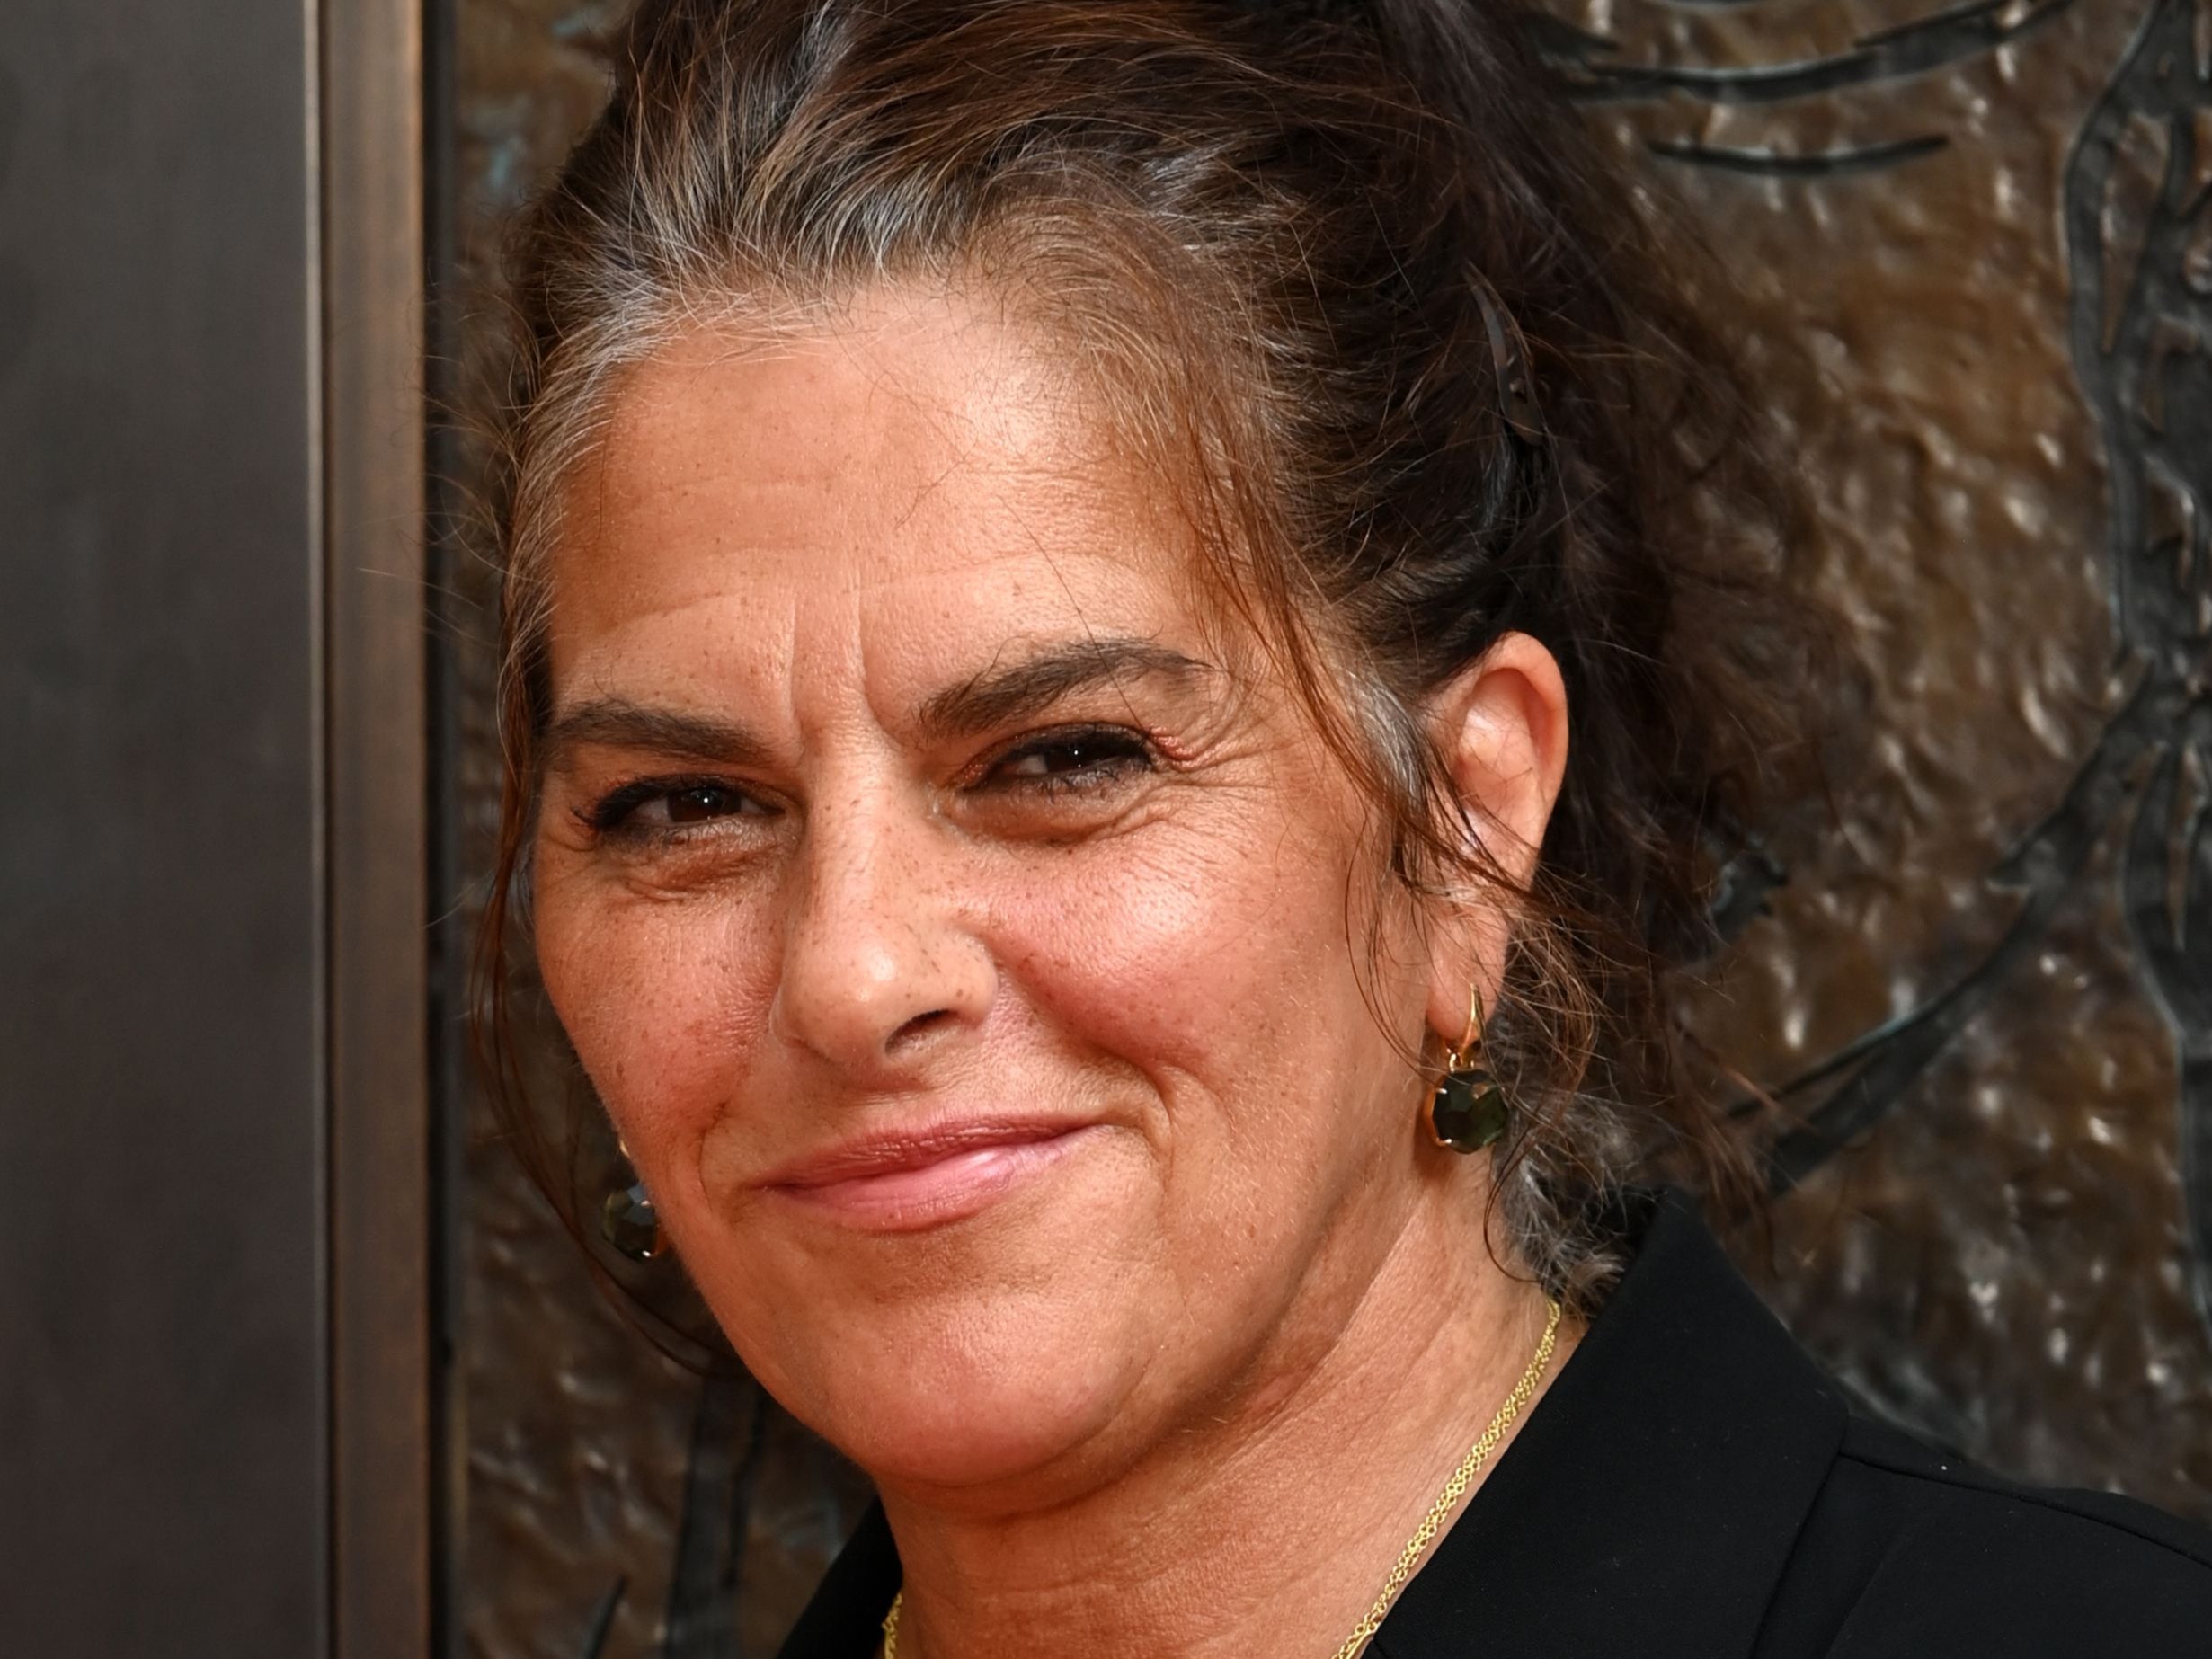 Artist Tracey Emin has also been recognised on the King’s birthday honours list